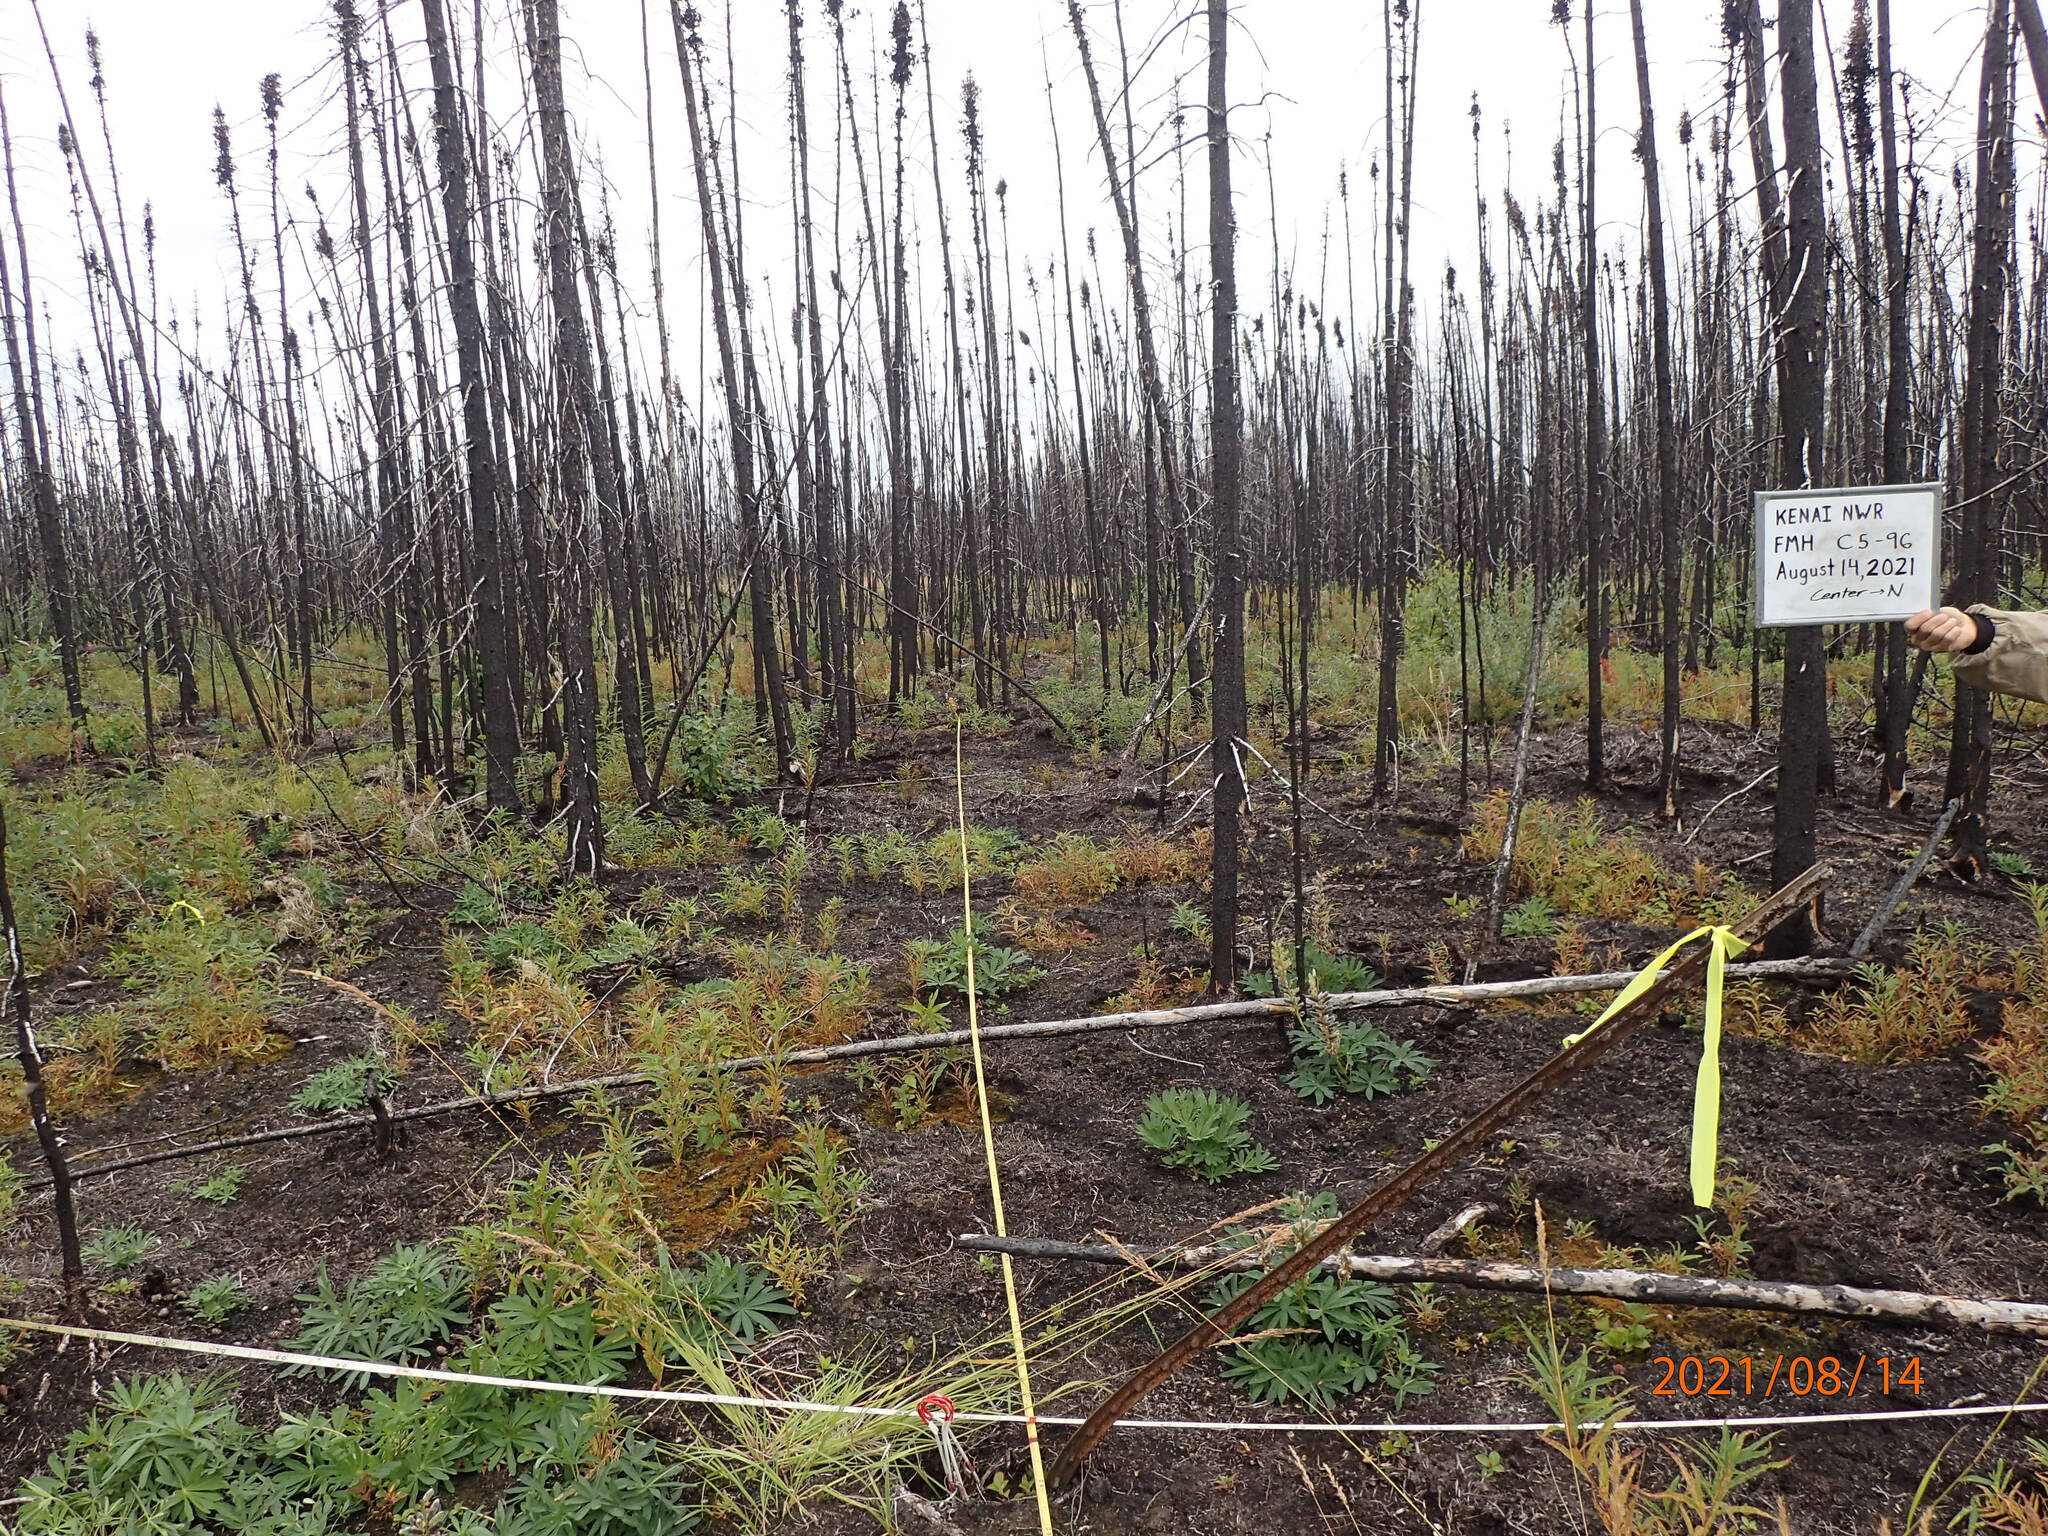 There are two photos of Mystery Creek plots burned by Swan Lake. This plot was only burned by the Swan Lake Fire and has blackened duff with variable depth of burn, low shrubs resprouting from surviving roots, and other plants seeded in since the fire. Photos were taken in 2021. (Photo provided)